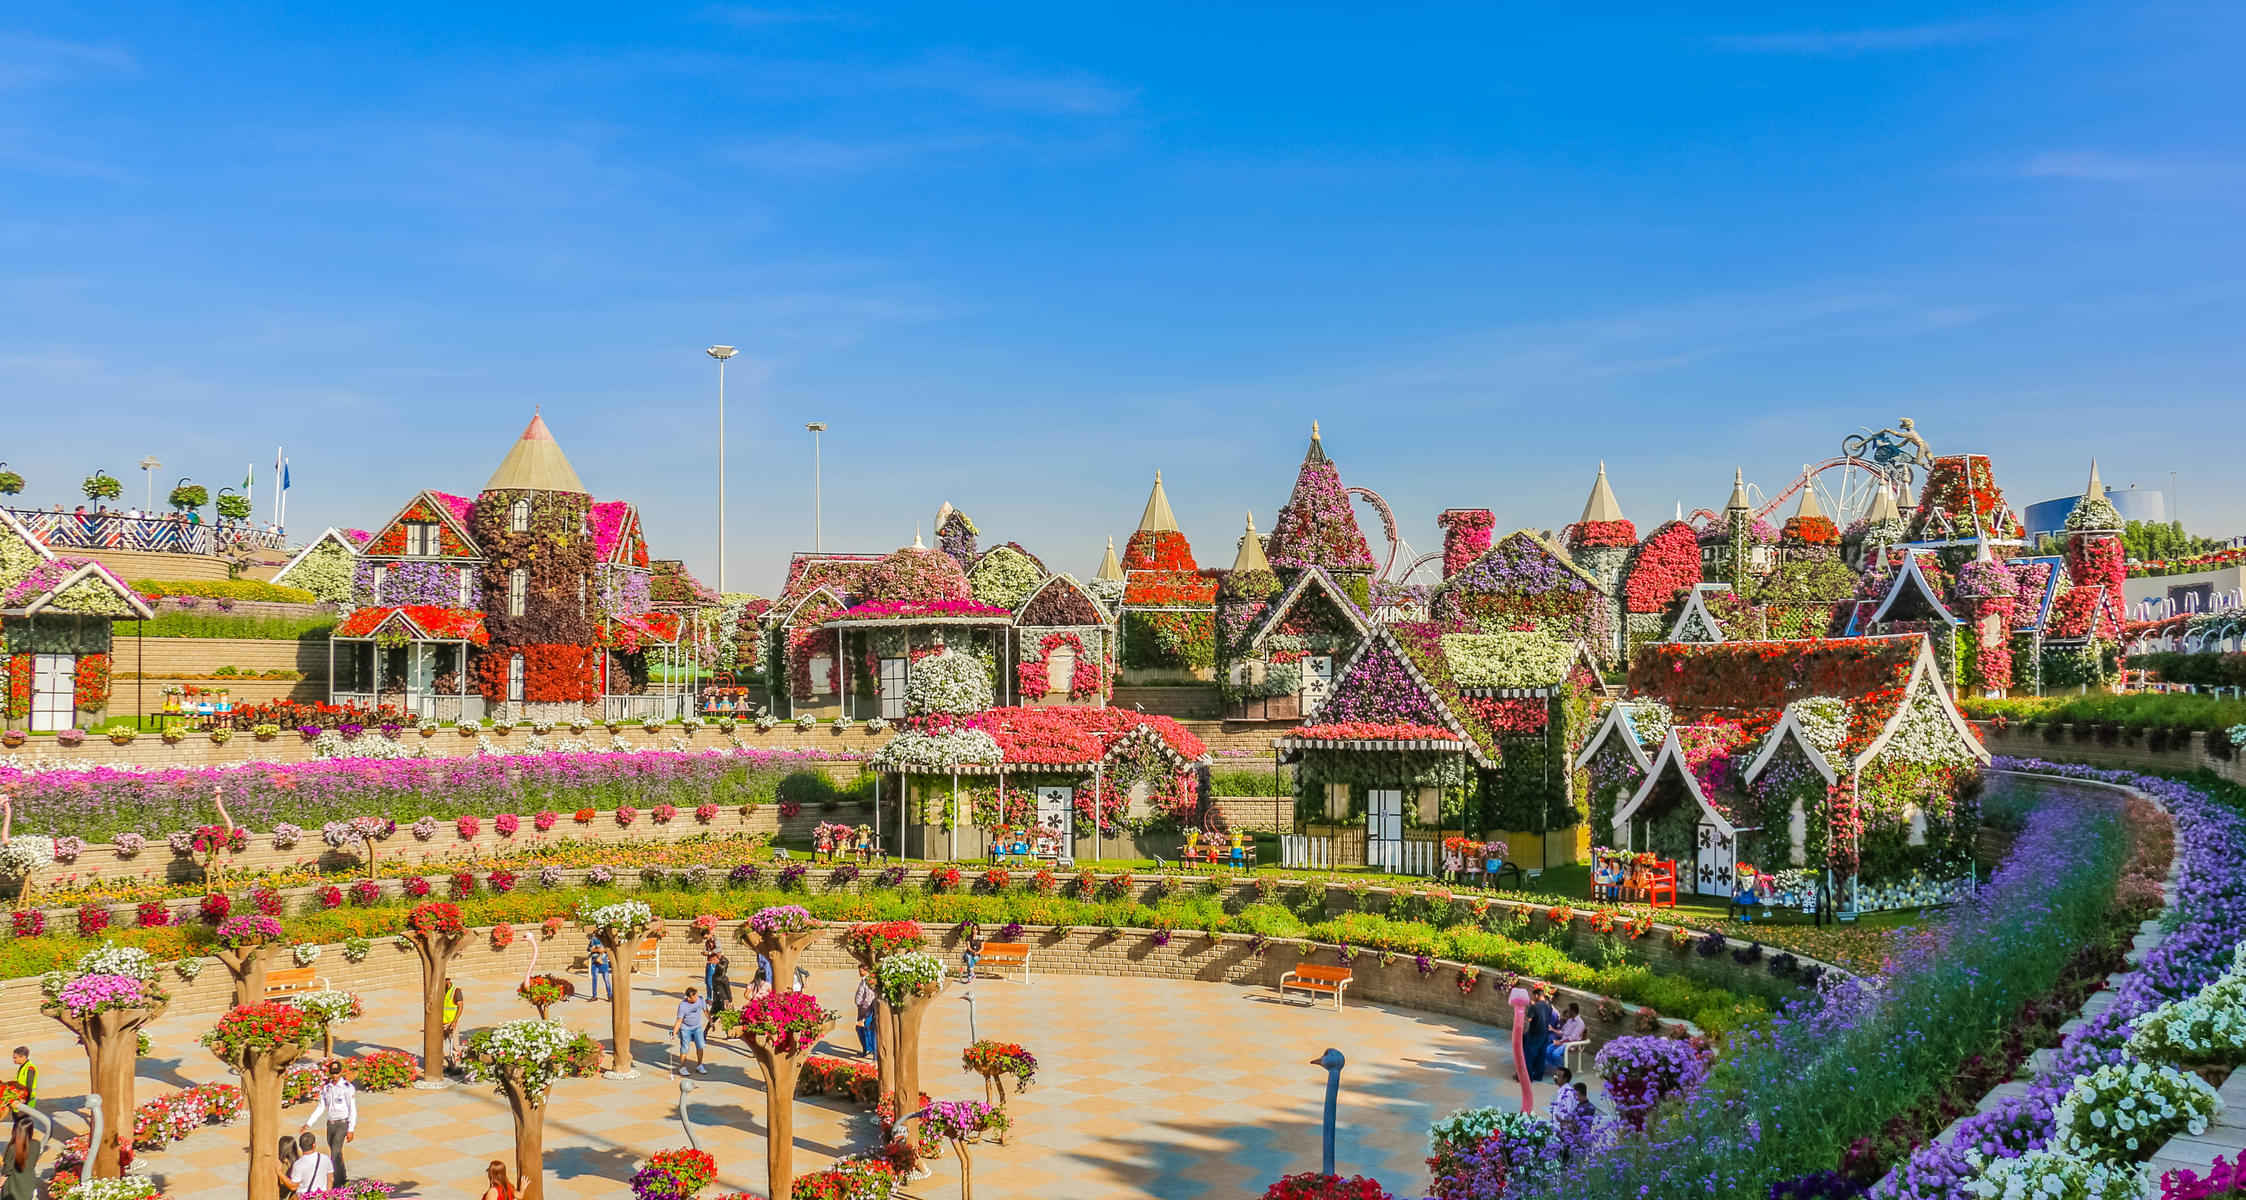 Take-in the scenic beauty of the magnificent Dubai Miracle Garden